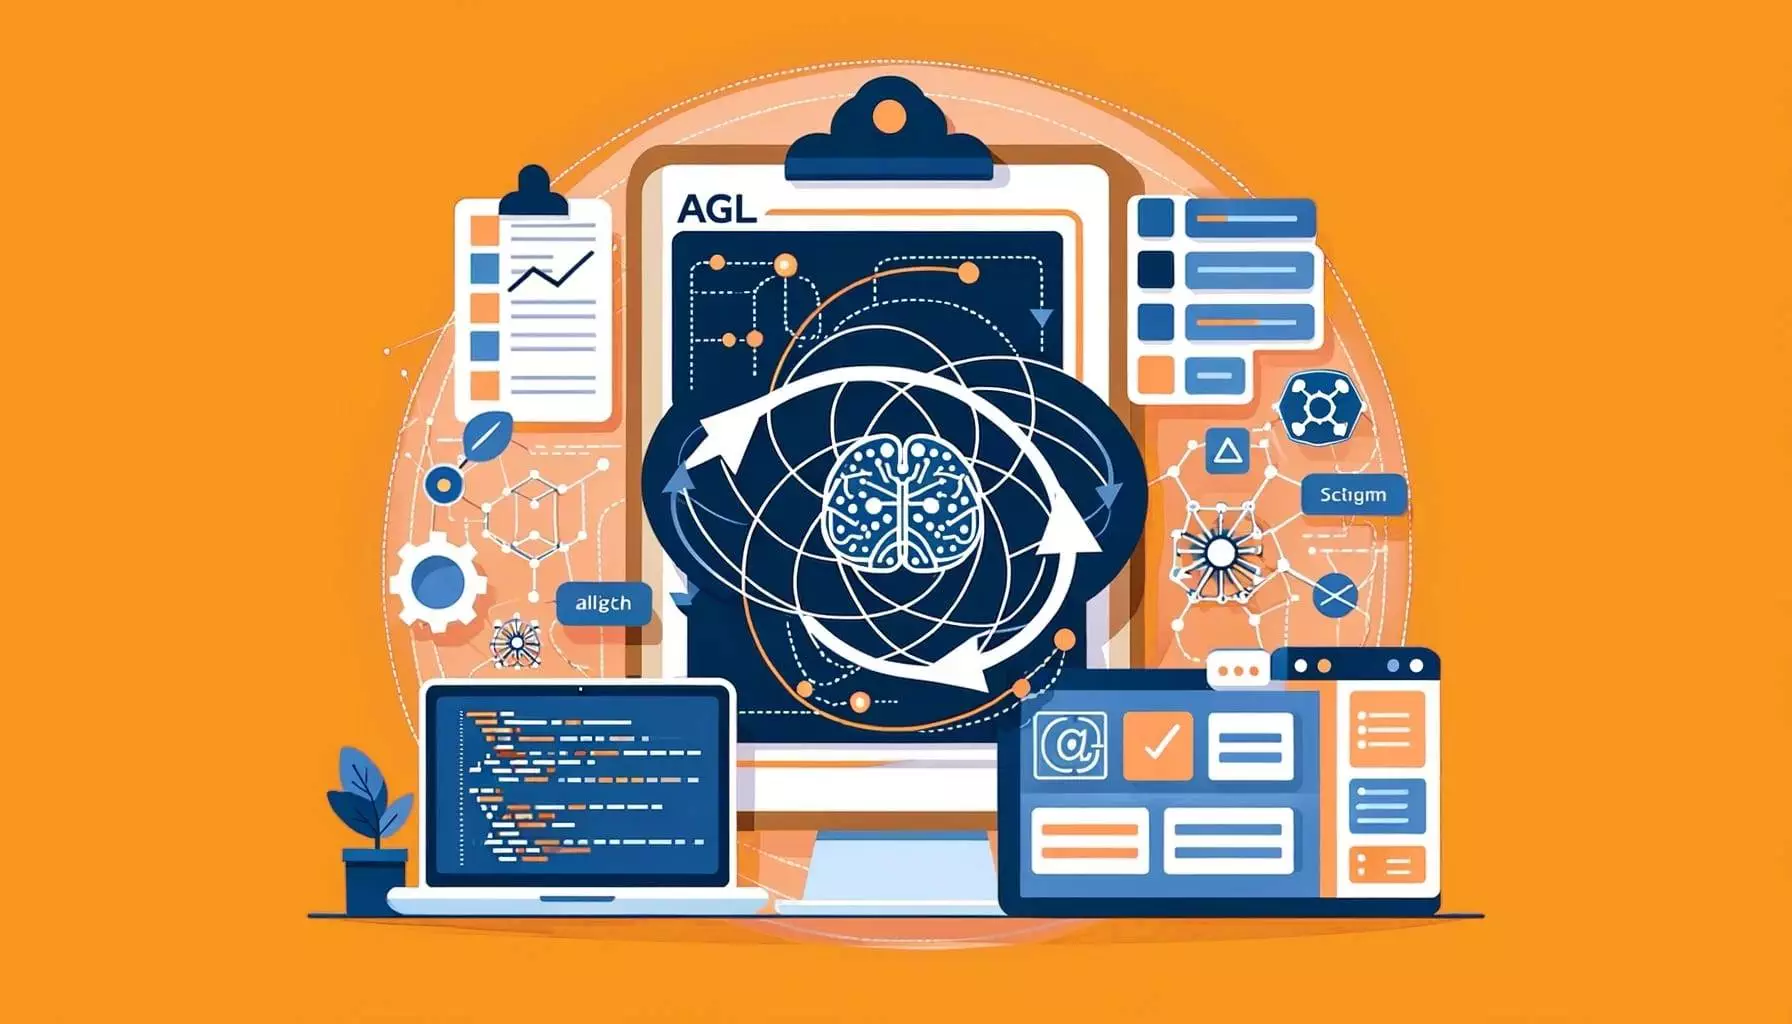 Illustration of Agile and AI software development with laptops, charts, and artificial intelligence symbols.